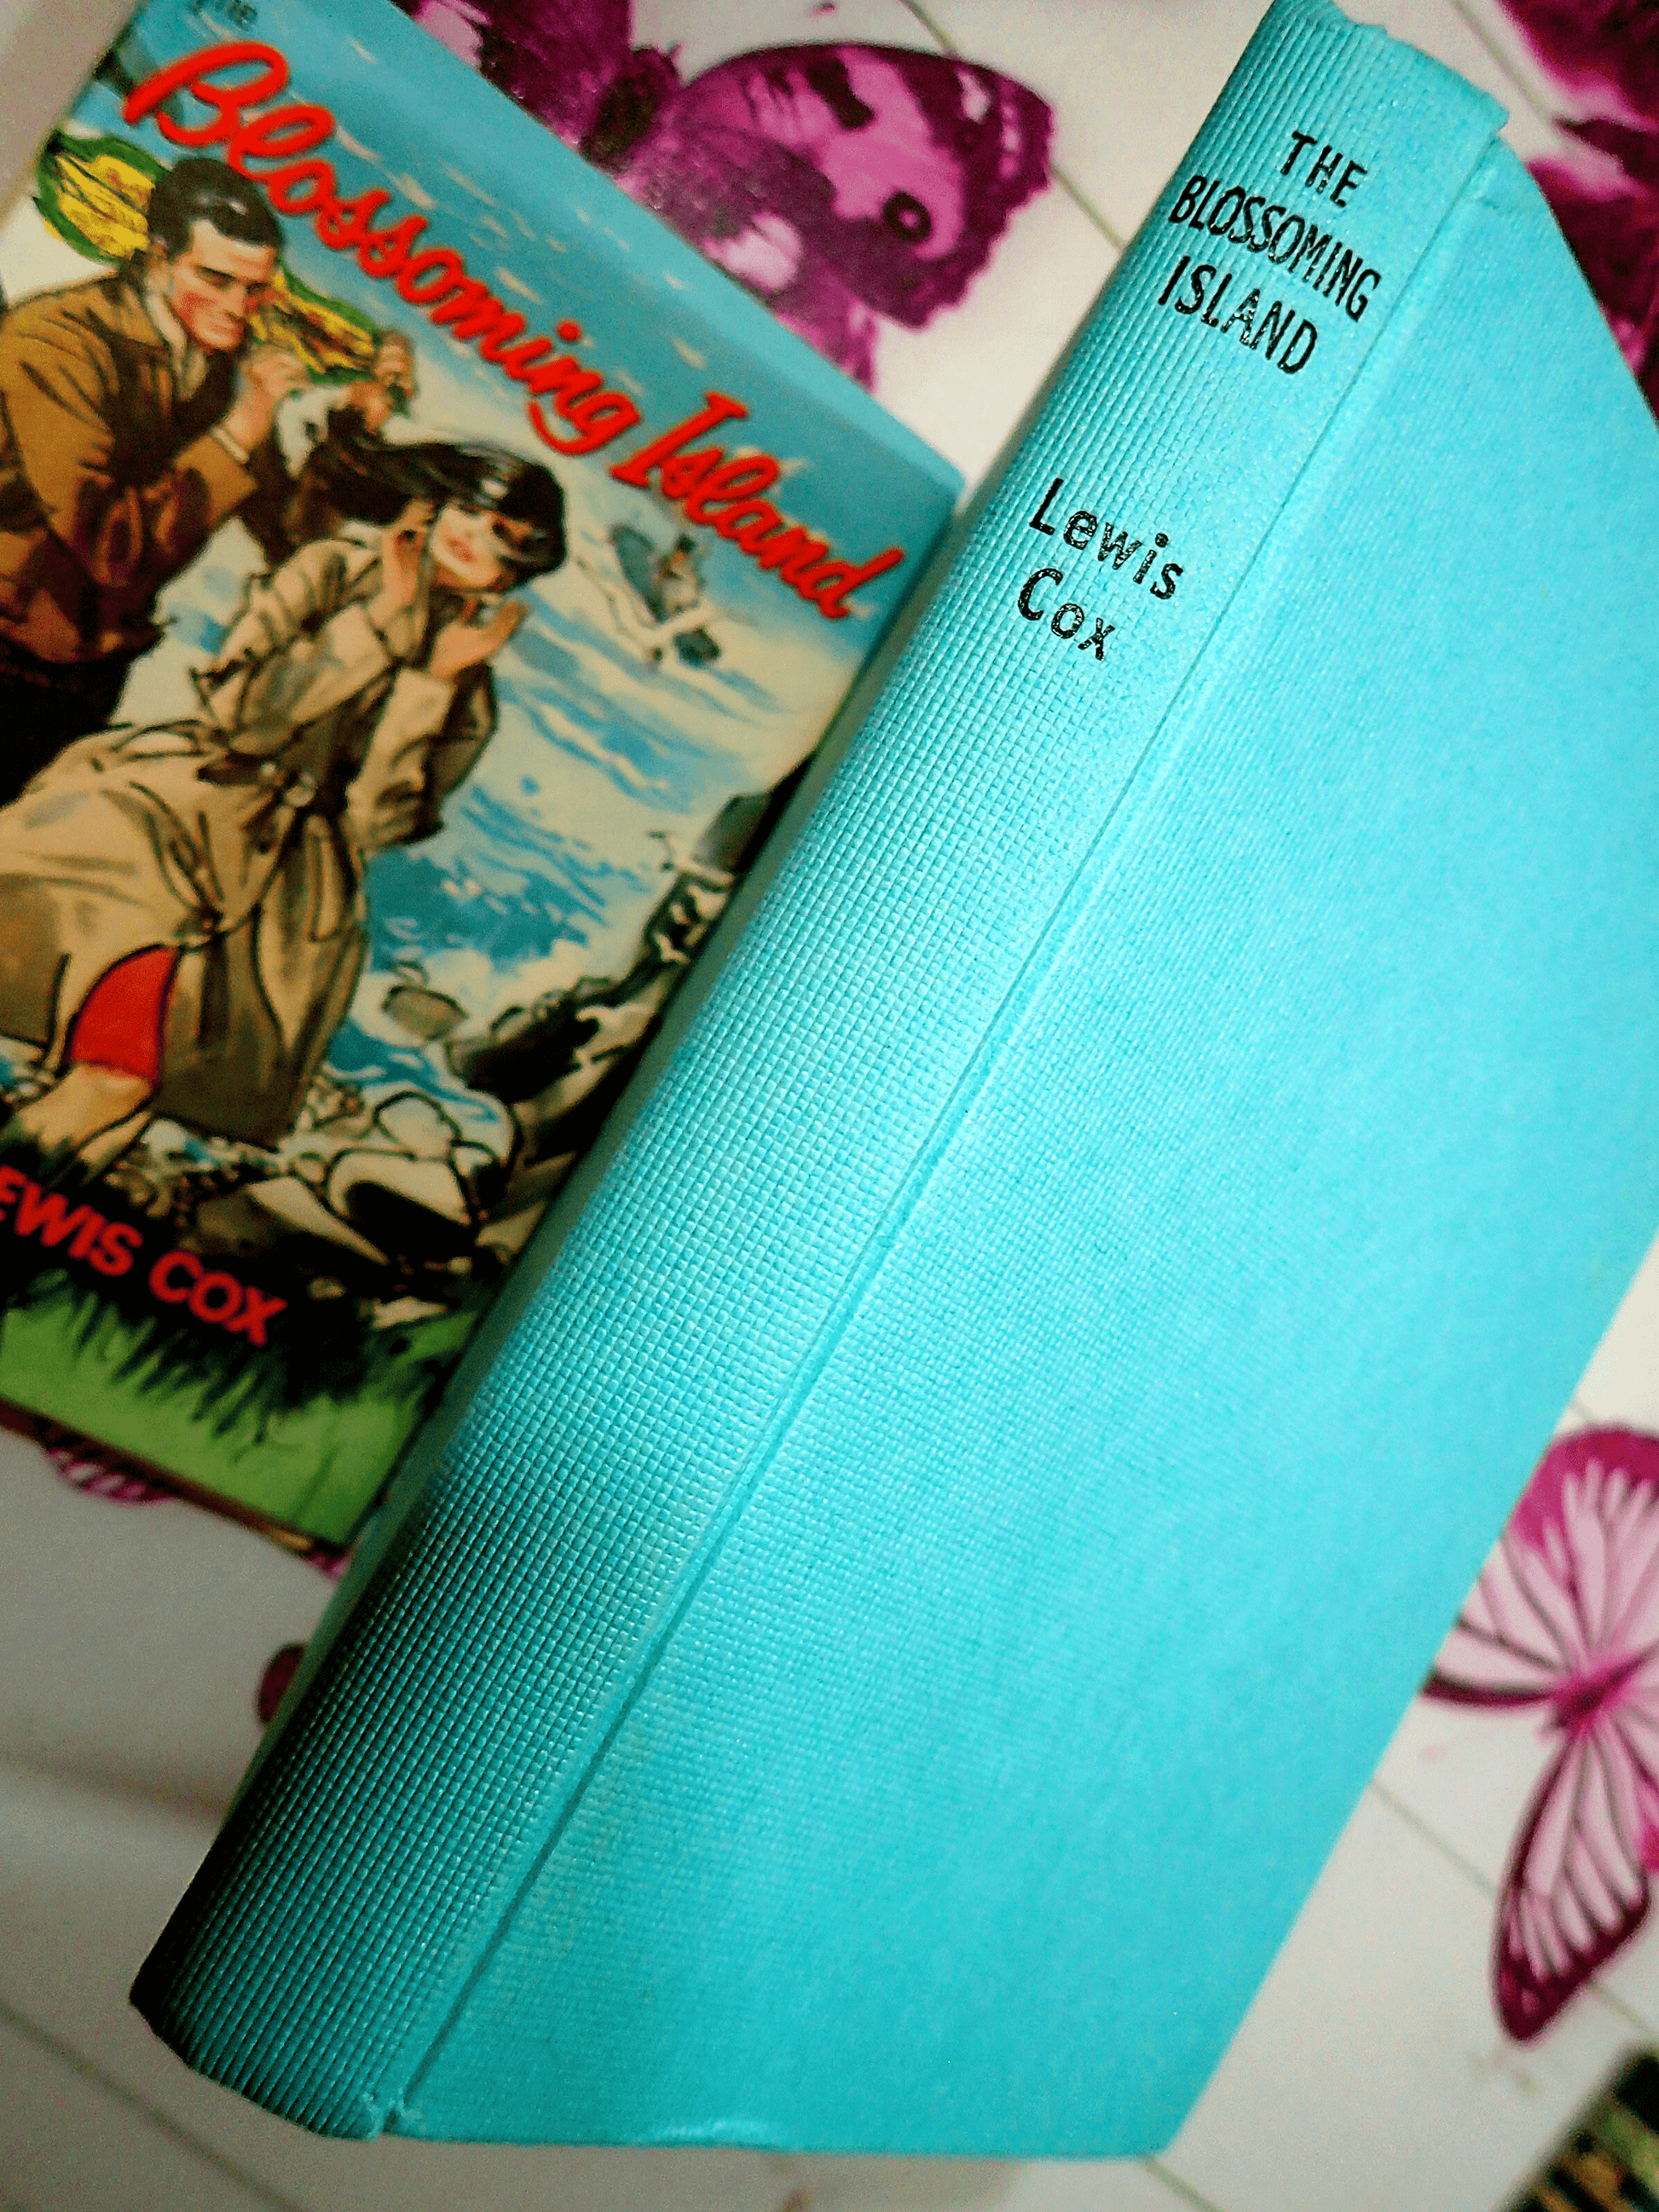 Blue boards of Blossoming Island Lewis Cox Romance Book Club Hardback showing black titles.